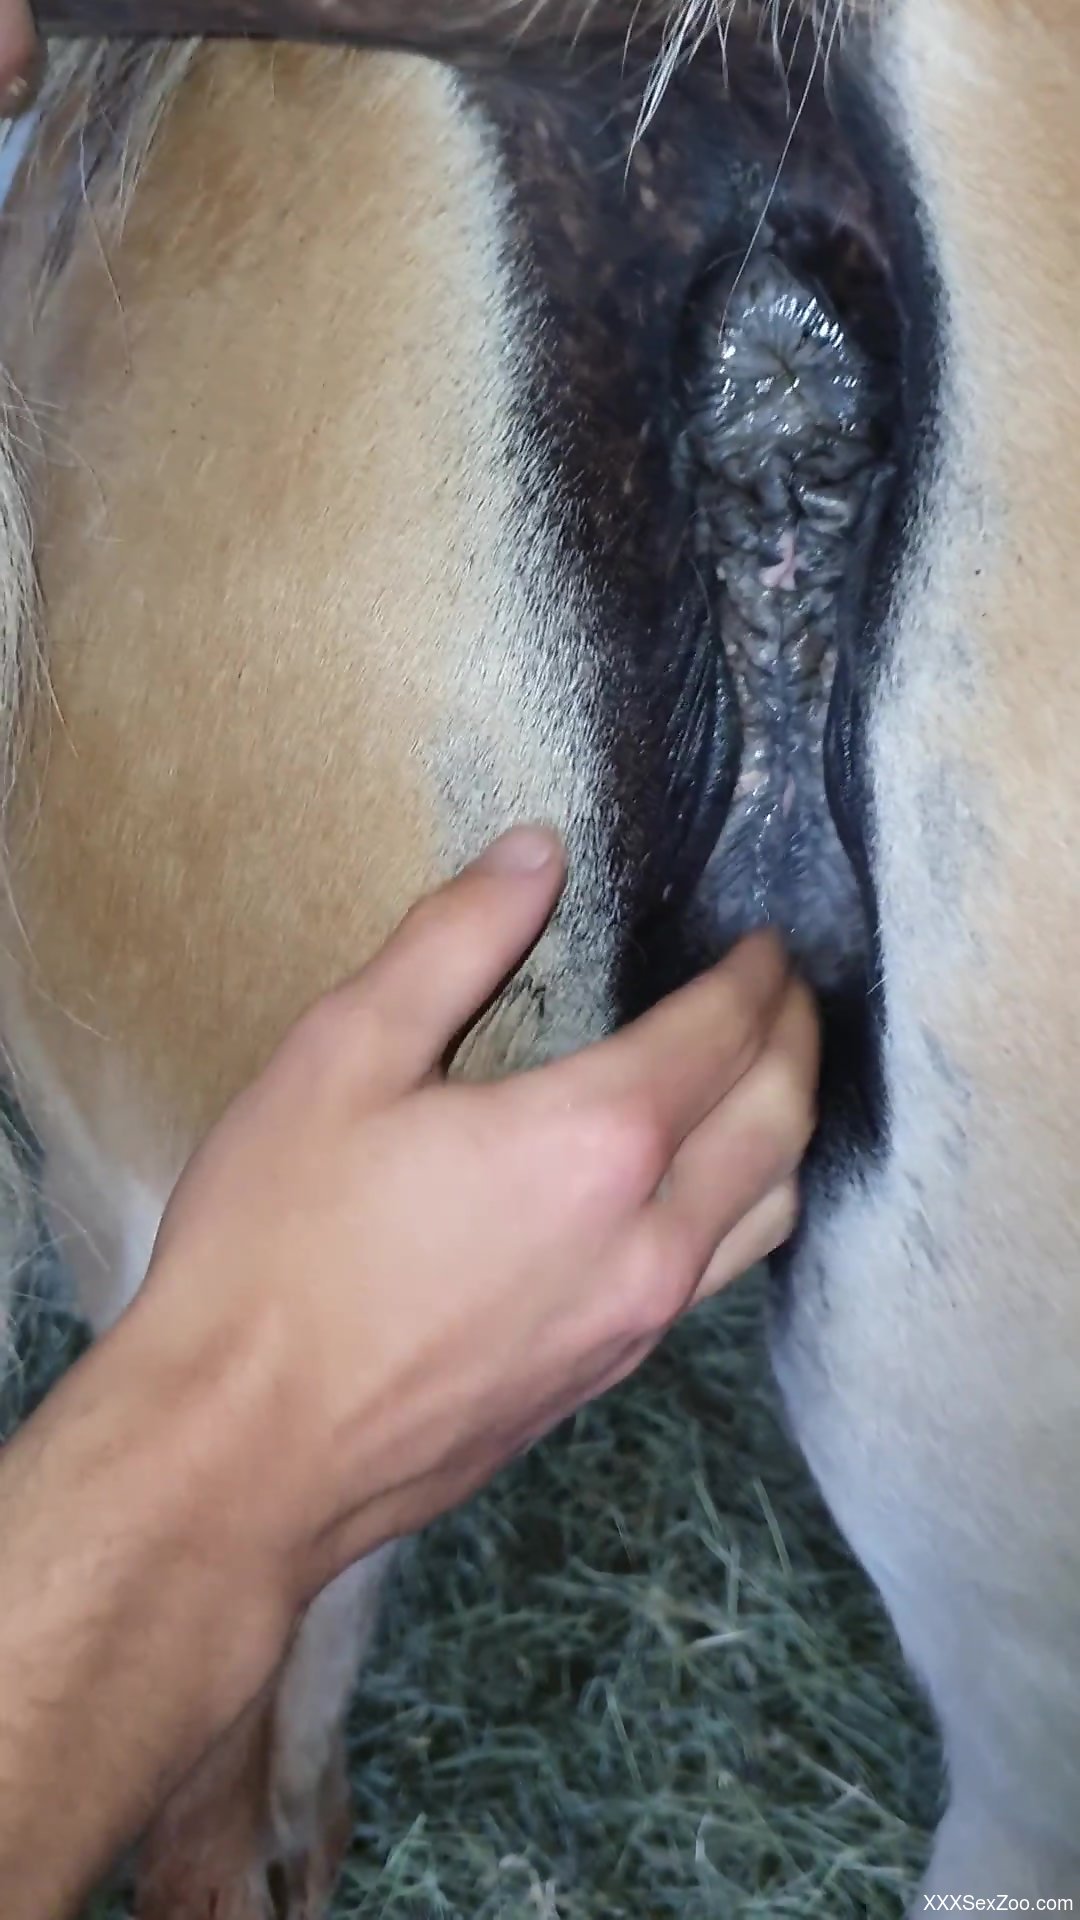 Horse and man porn